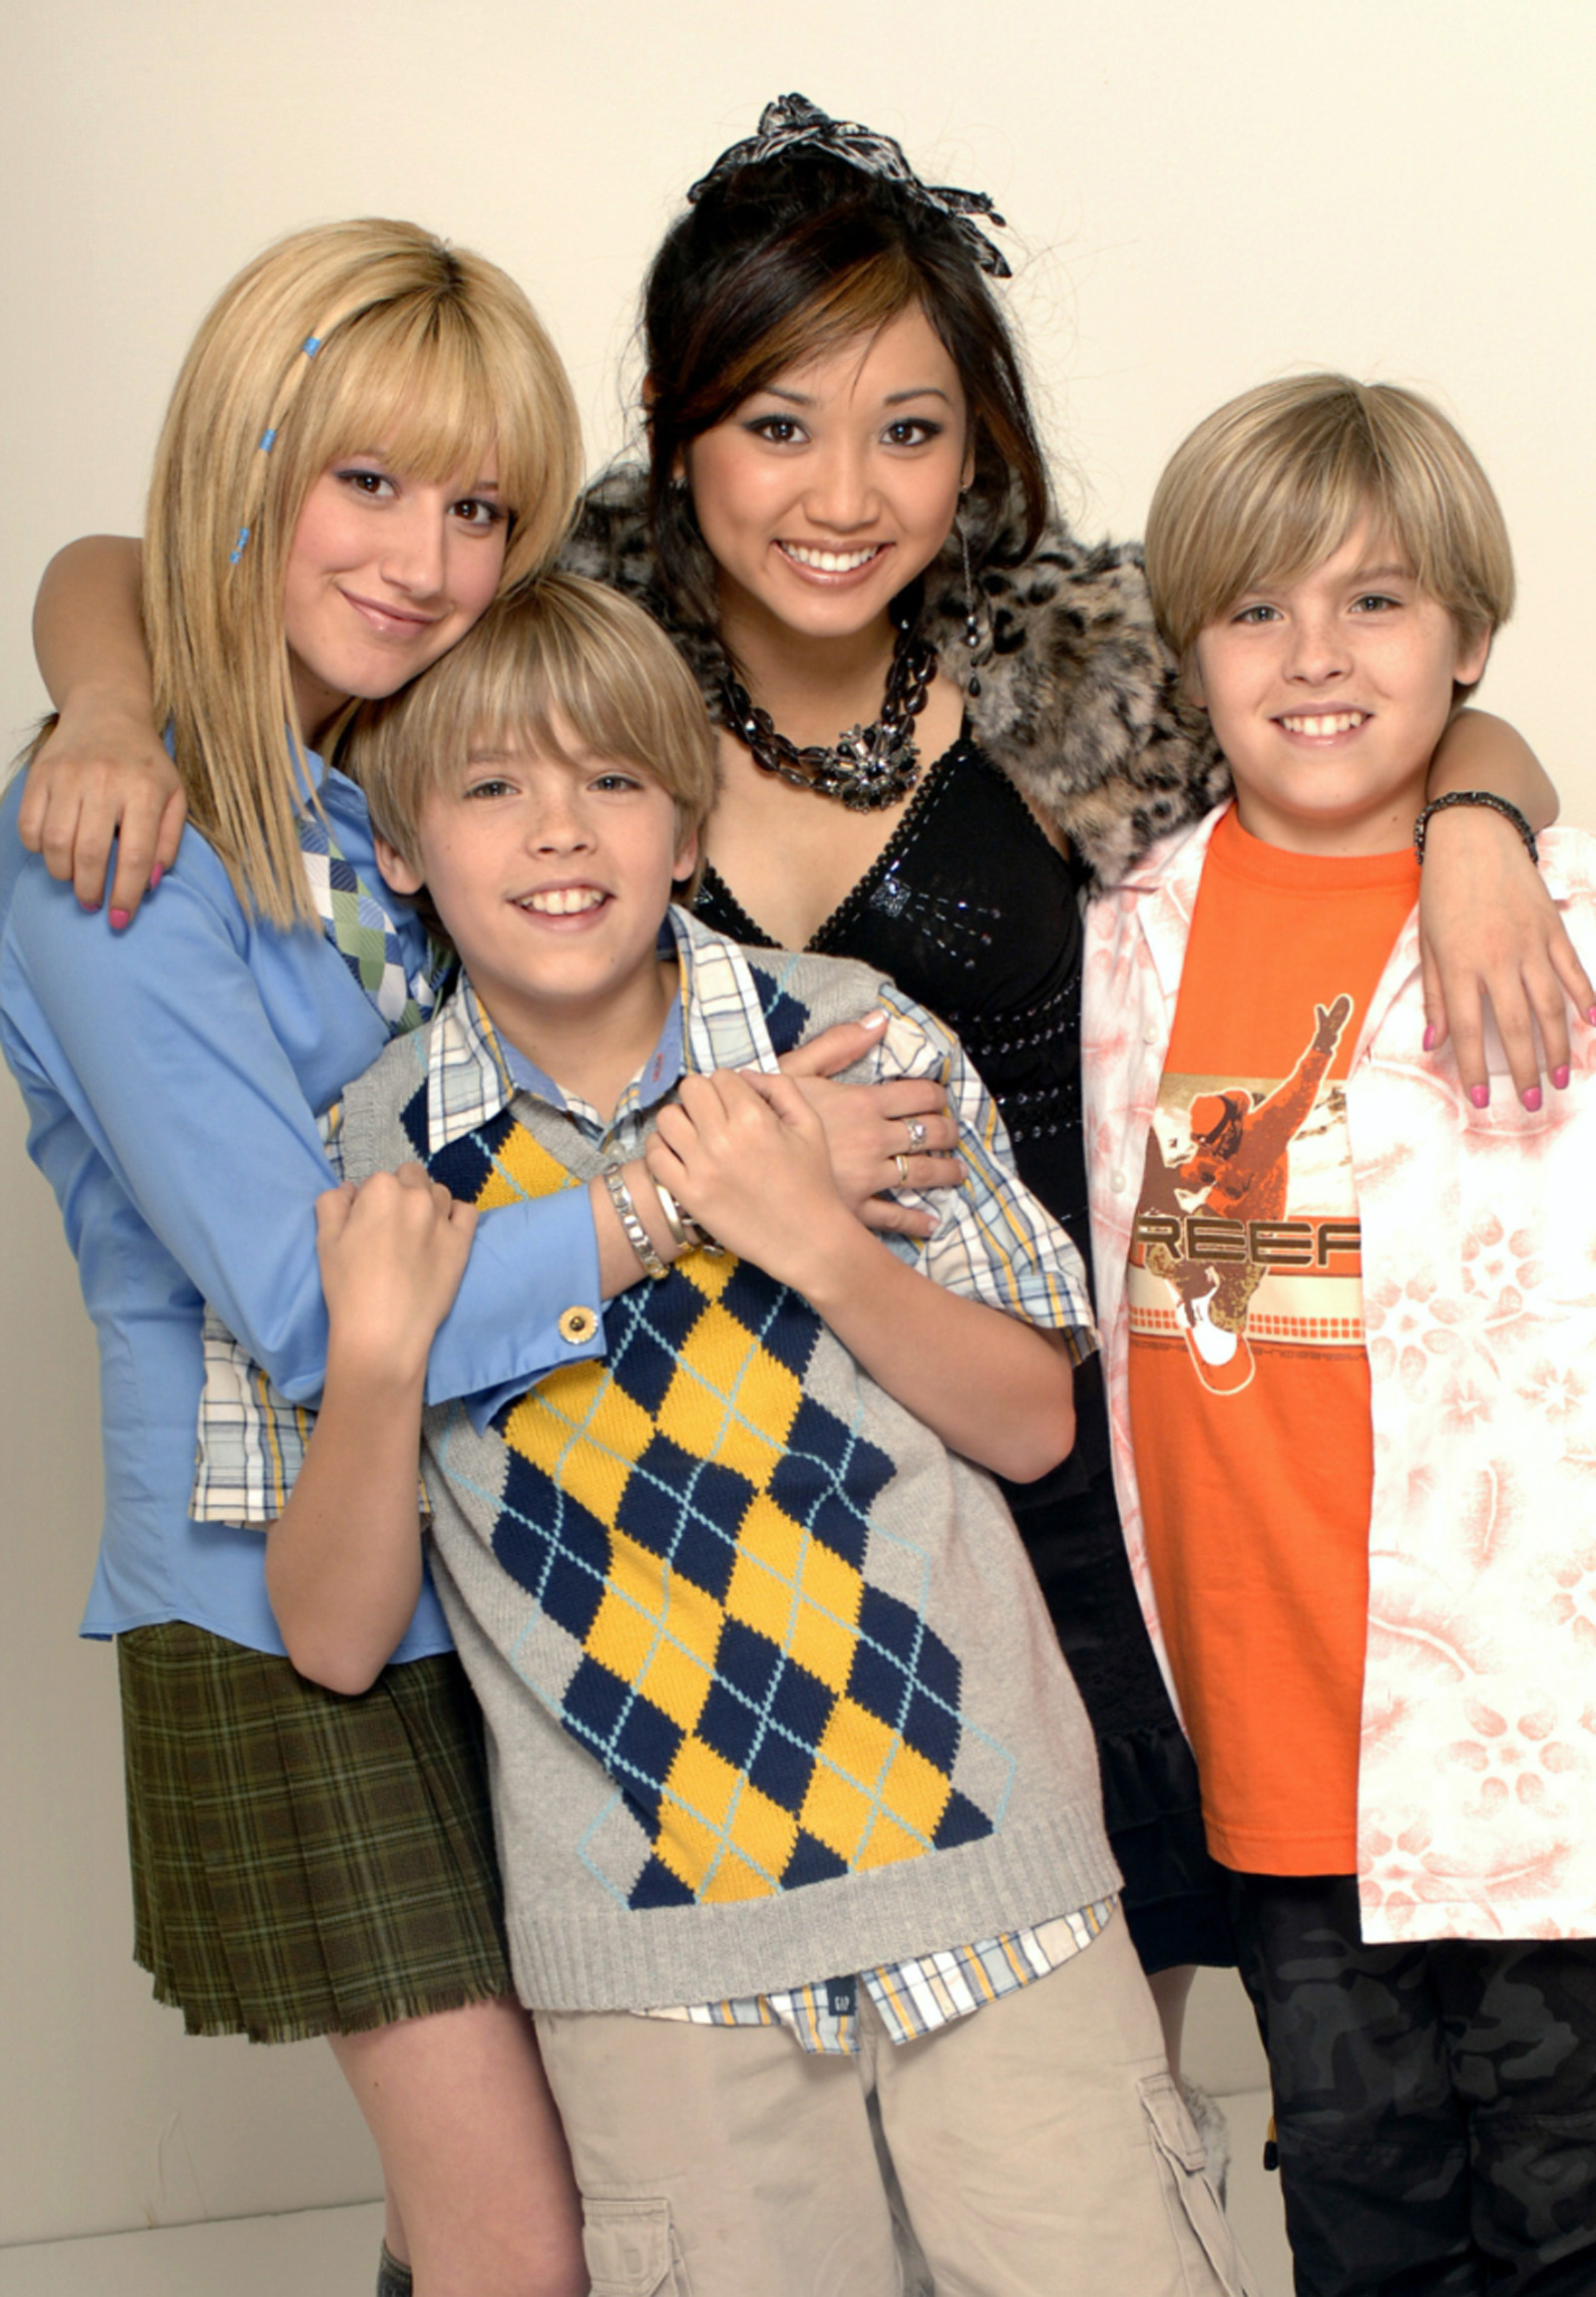 Life of Zack and Cody (Season 1). Cole Sprouse in The Suite Life of Zack an...